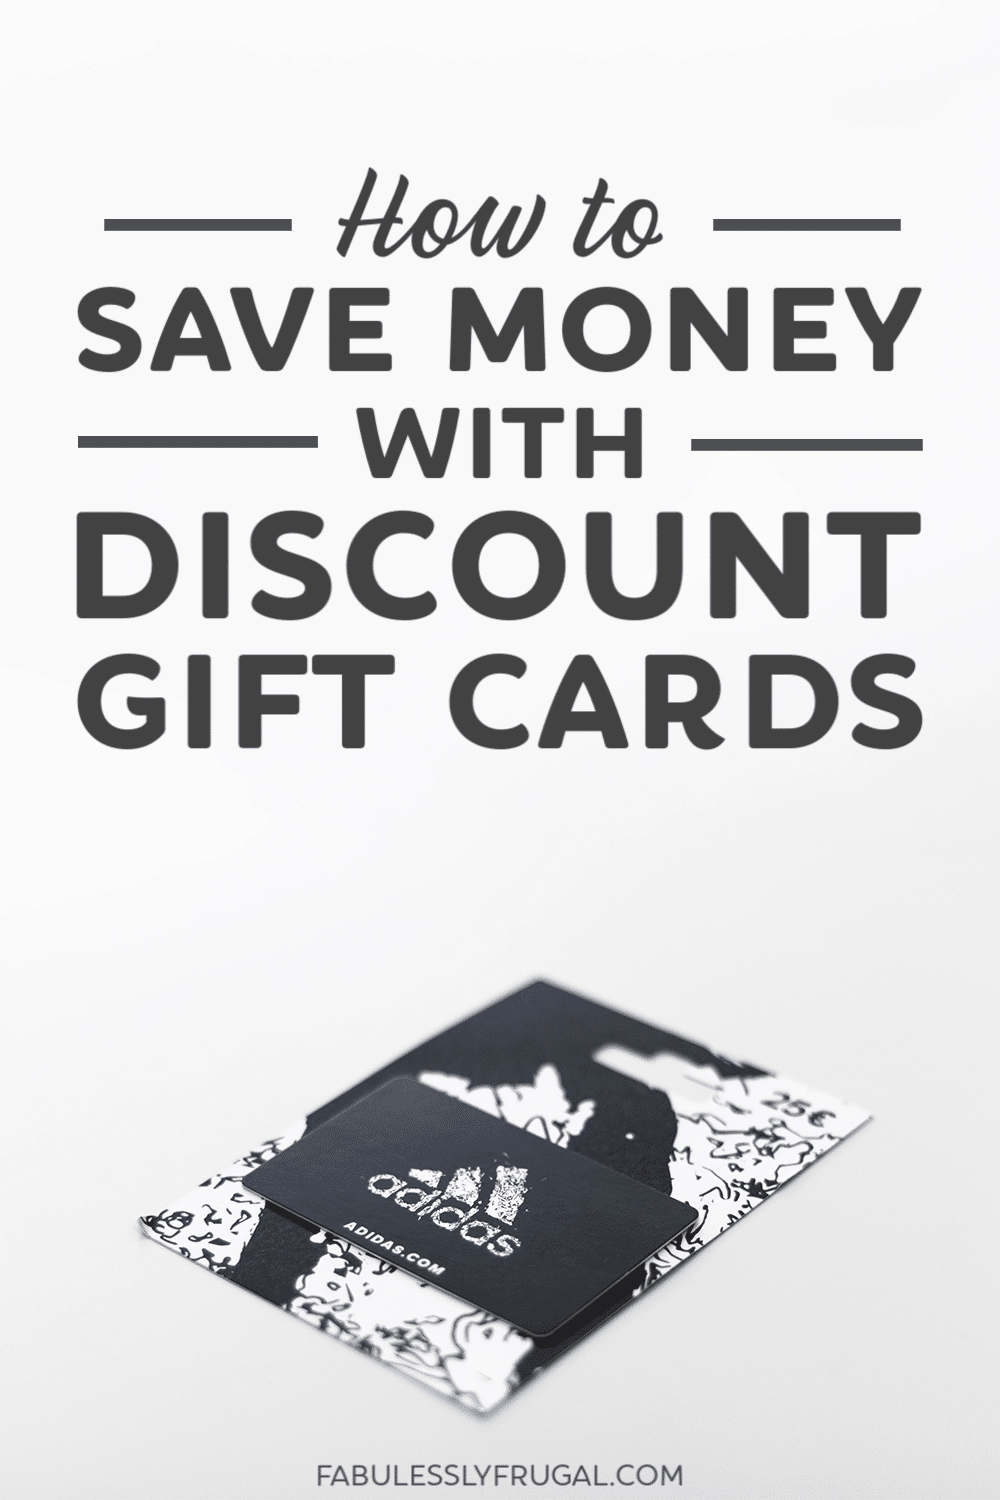 How to save money with gift cards